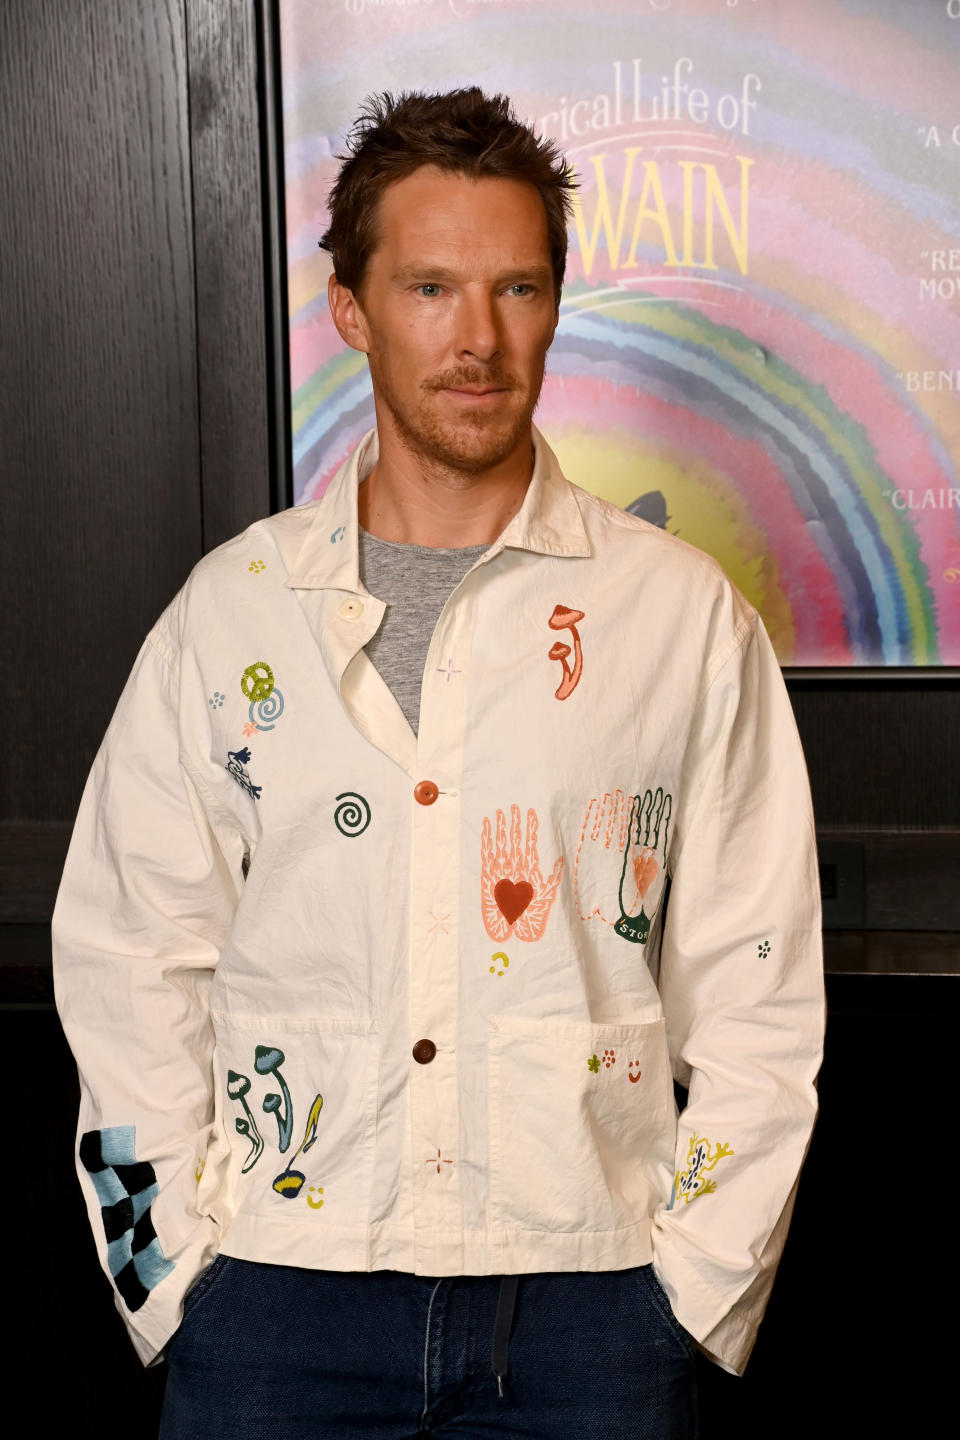 Cumberbatch wears a loose button-down shirt and jeans at an event